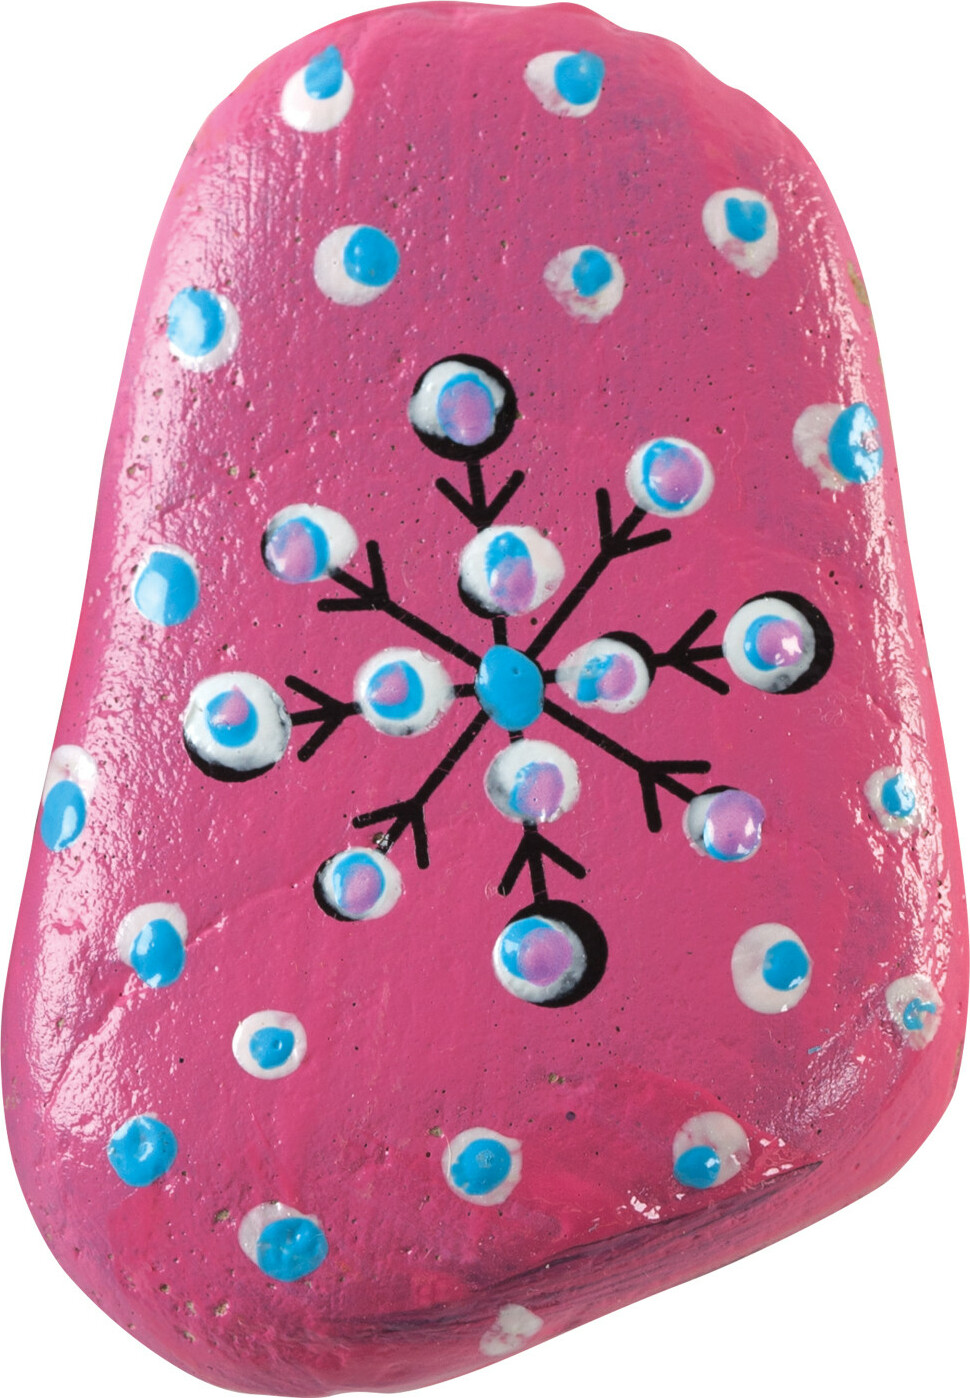 Hide & Seek Dot-a-Rock Painting Kit - The Toy Box Hanover